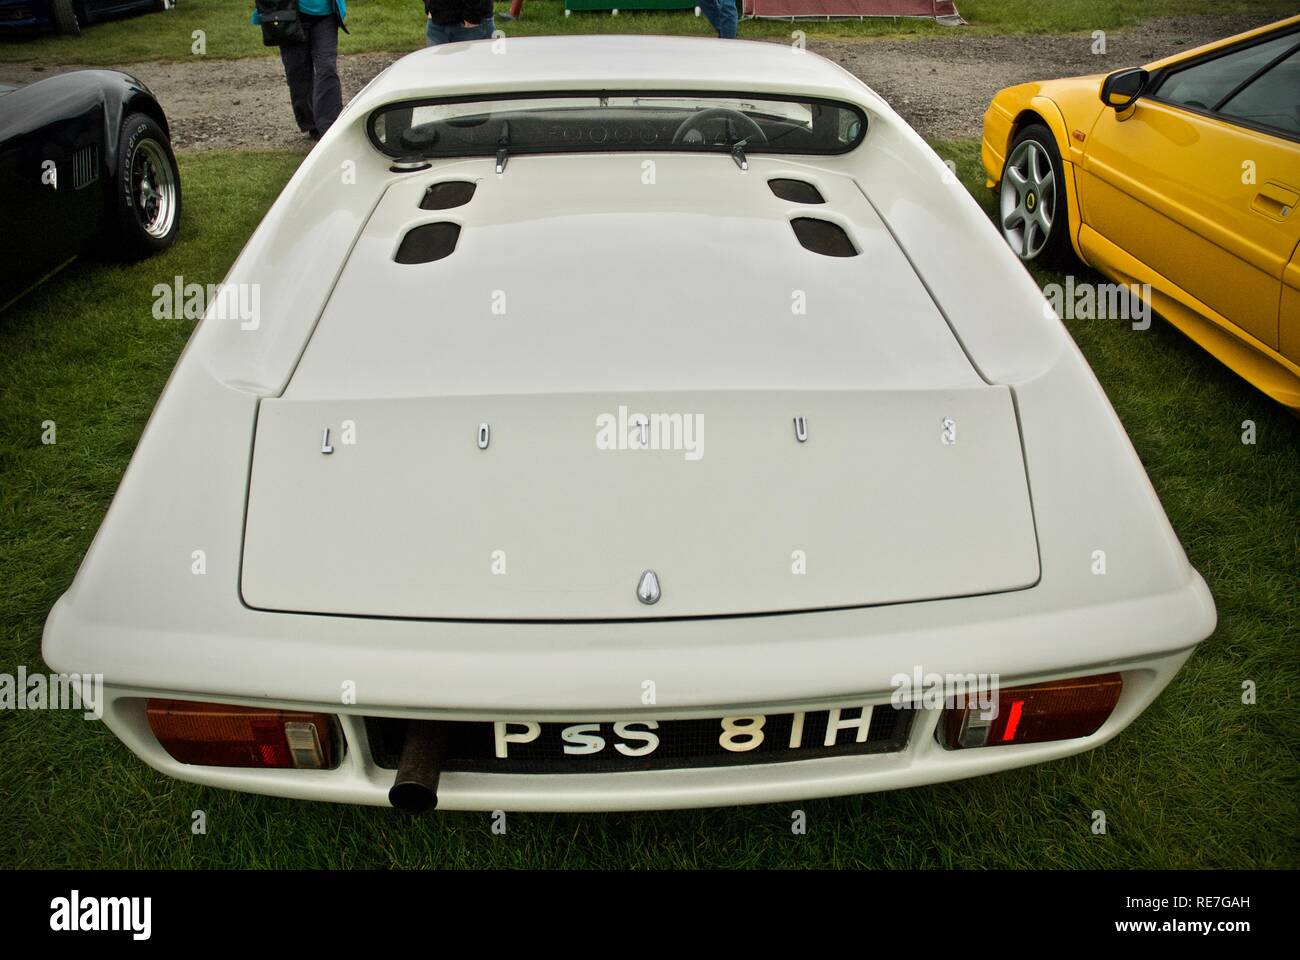 A Lotus Europa at the Anglesey Vintage Rally, Anglesey, North Wales, UK, May 2015 Stock Photo